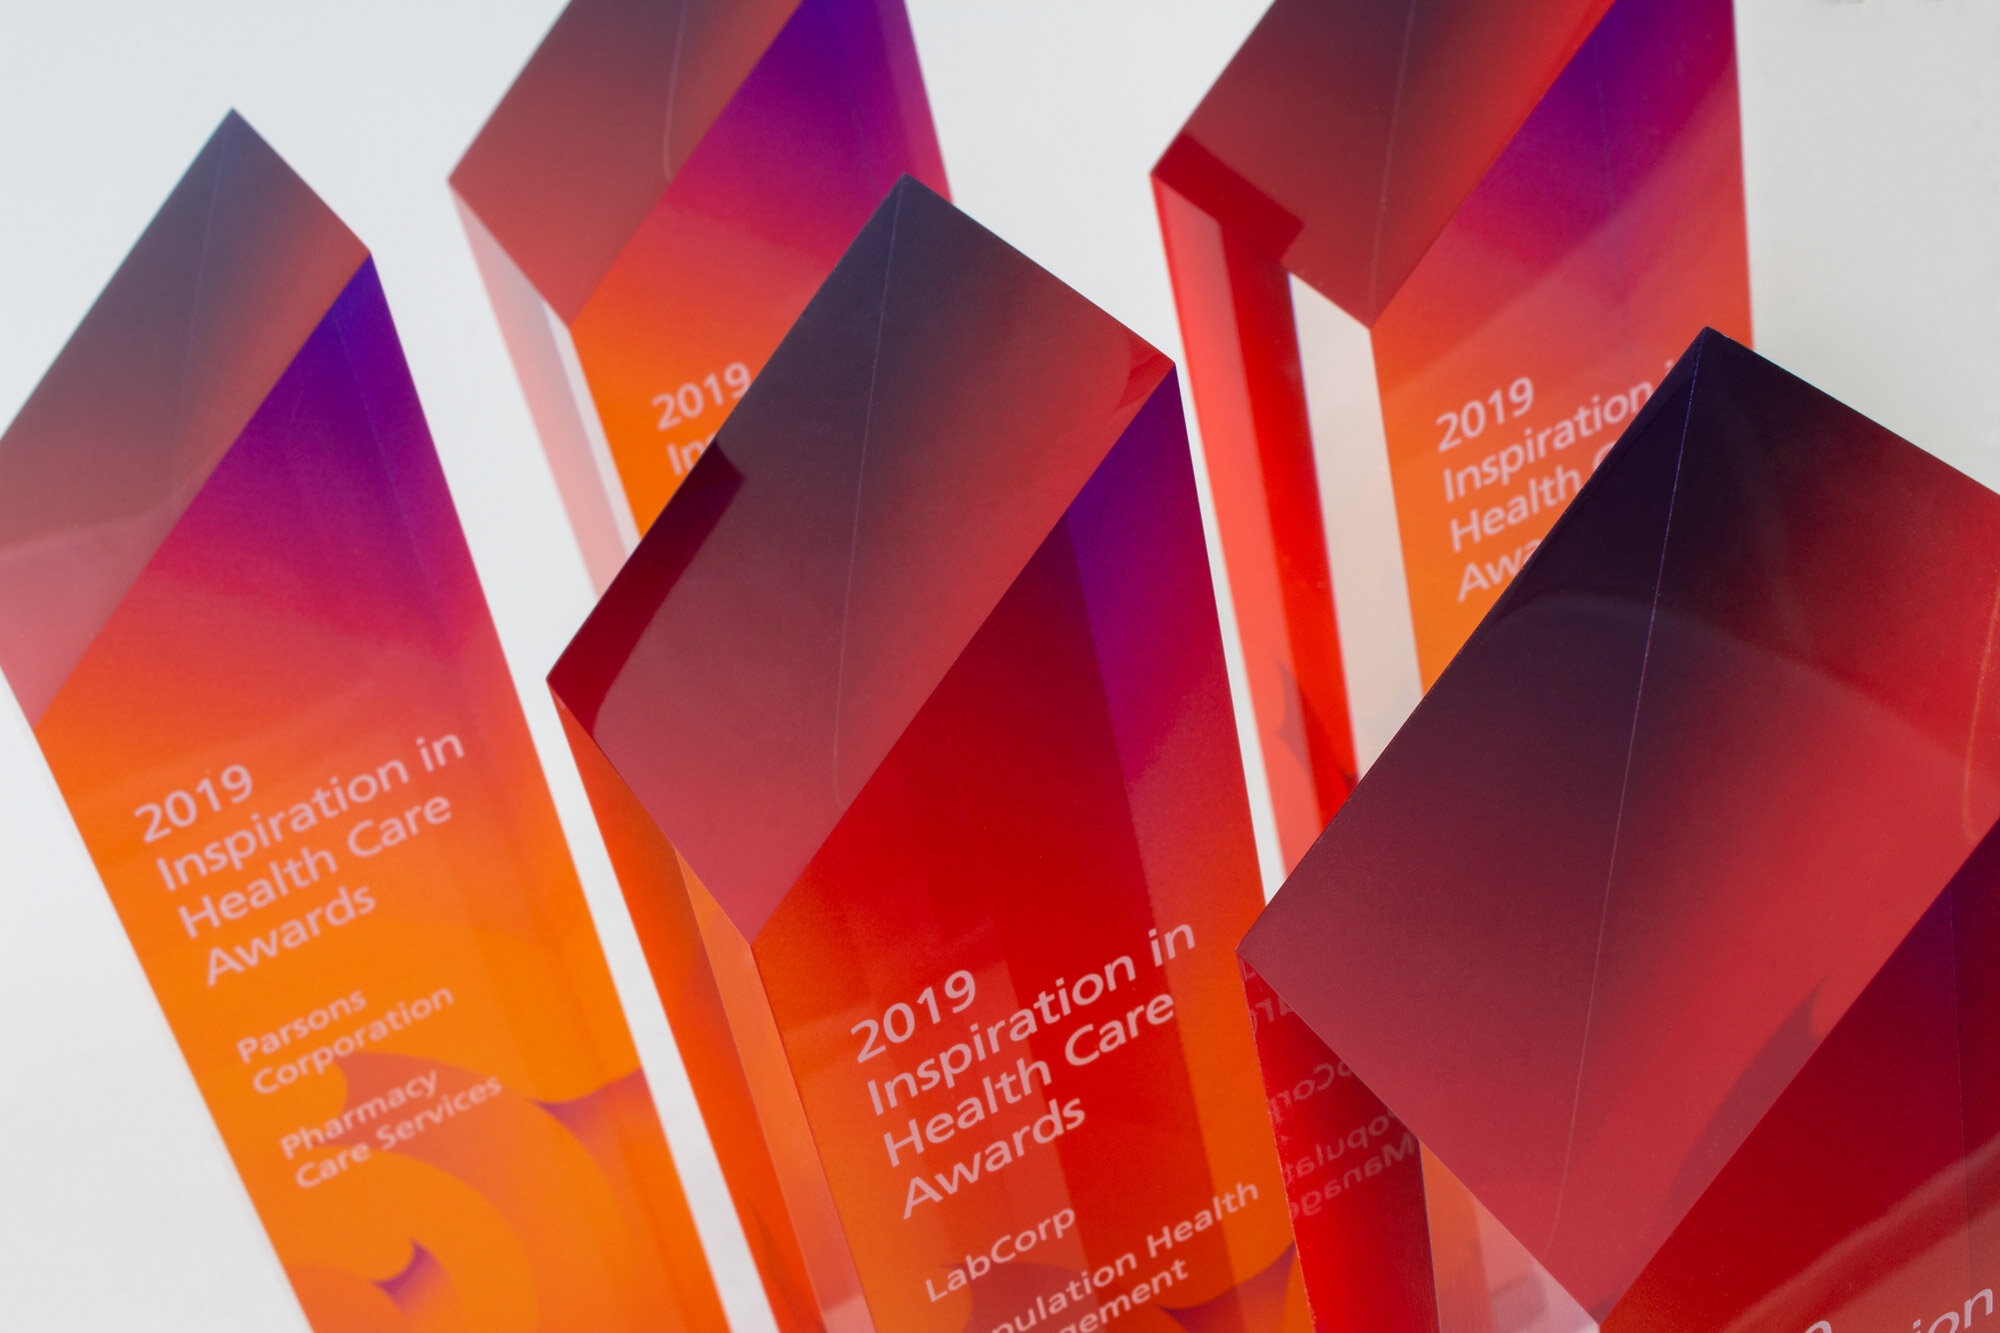 optum inspiration in healthcare awards acrylic and brushed metal 2